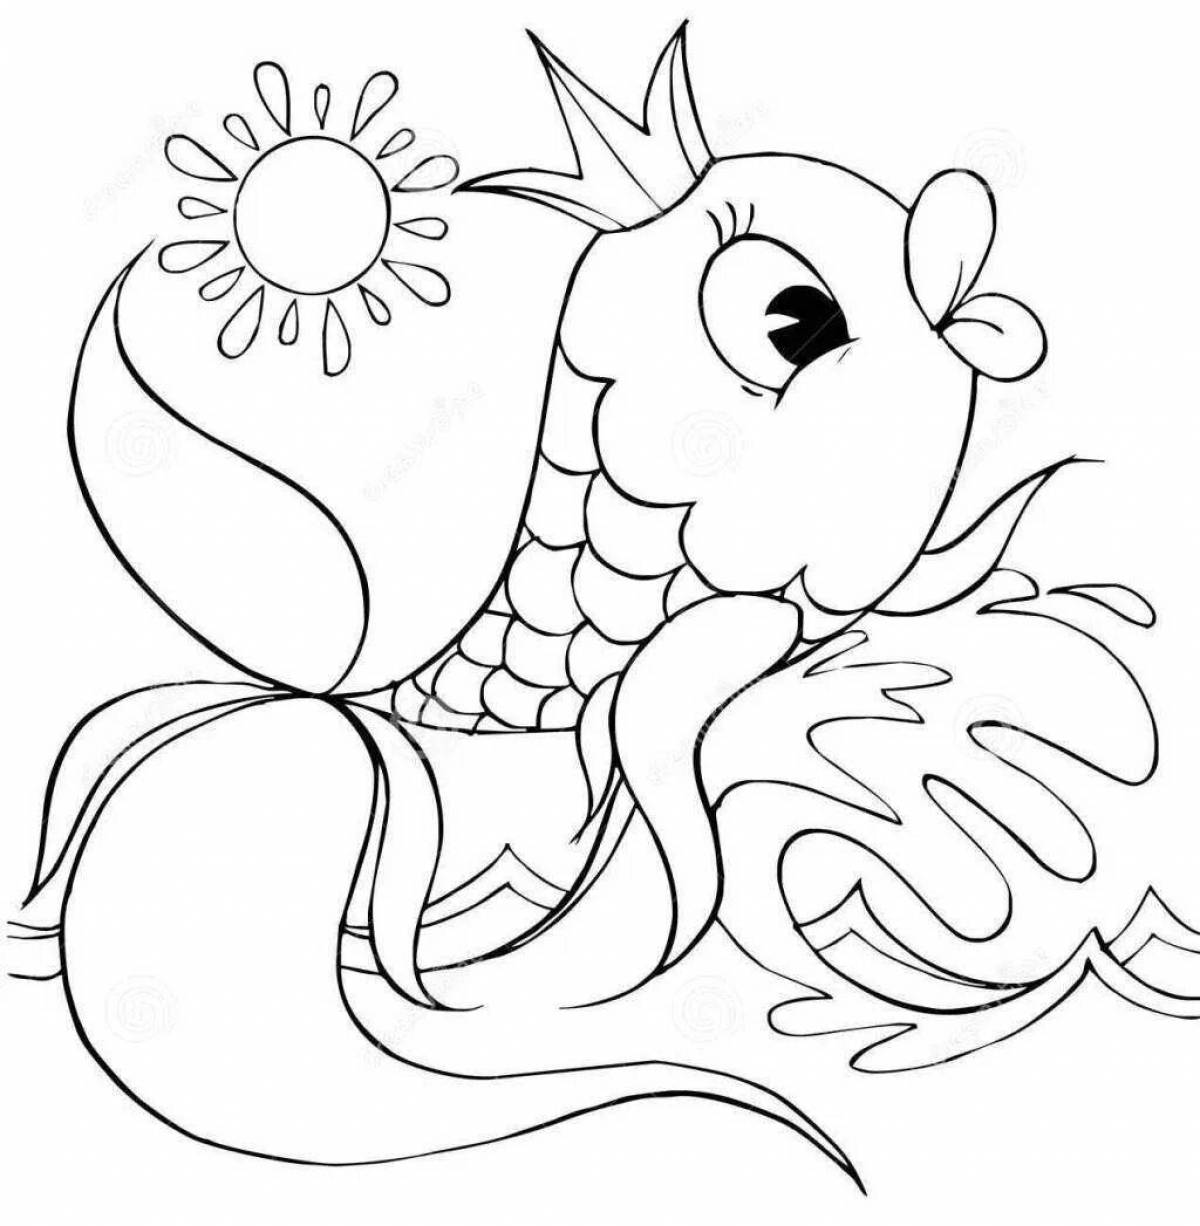 Glitter goldfish story coloring page